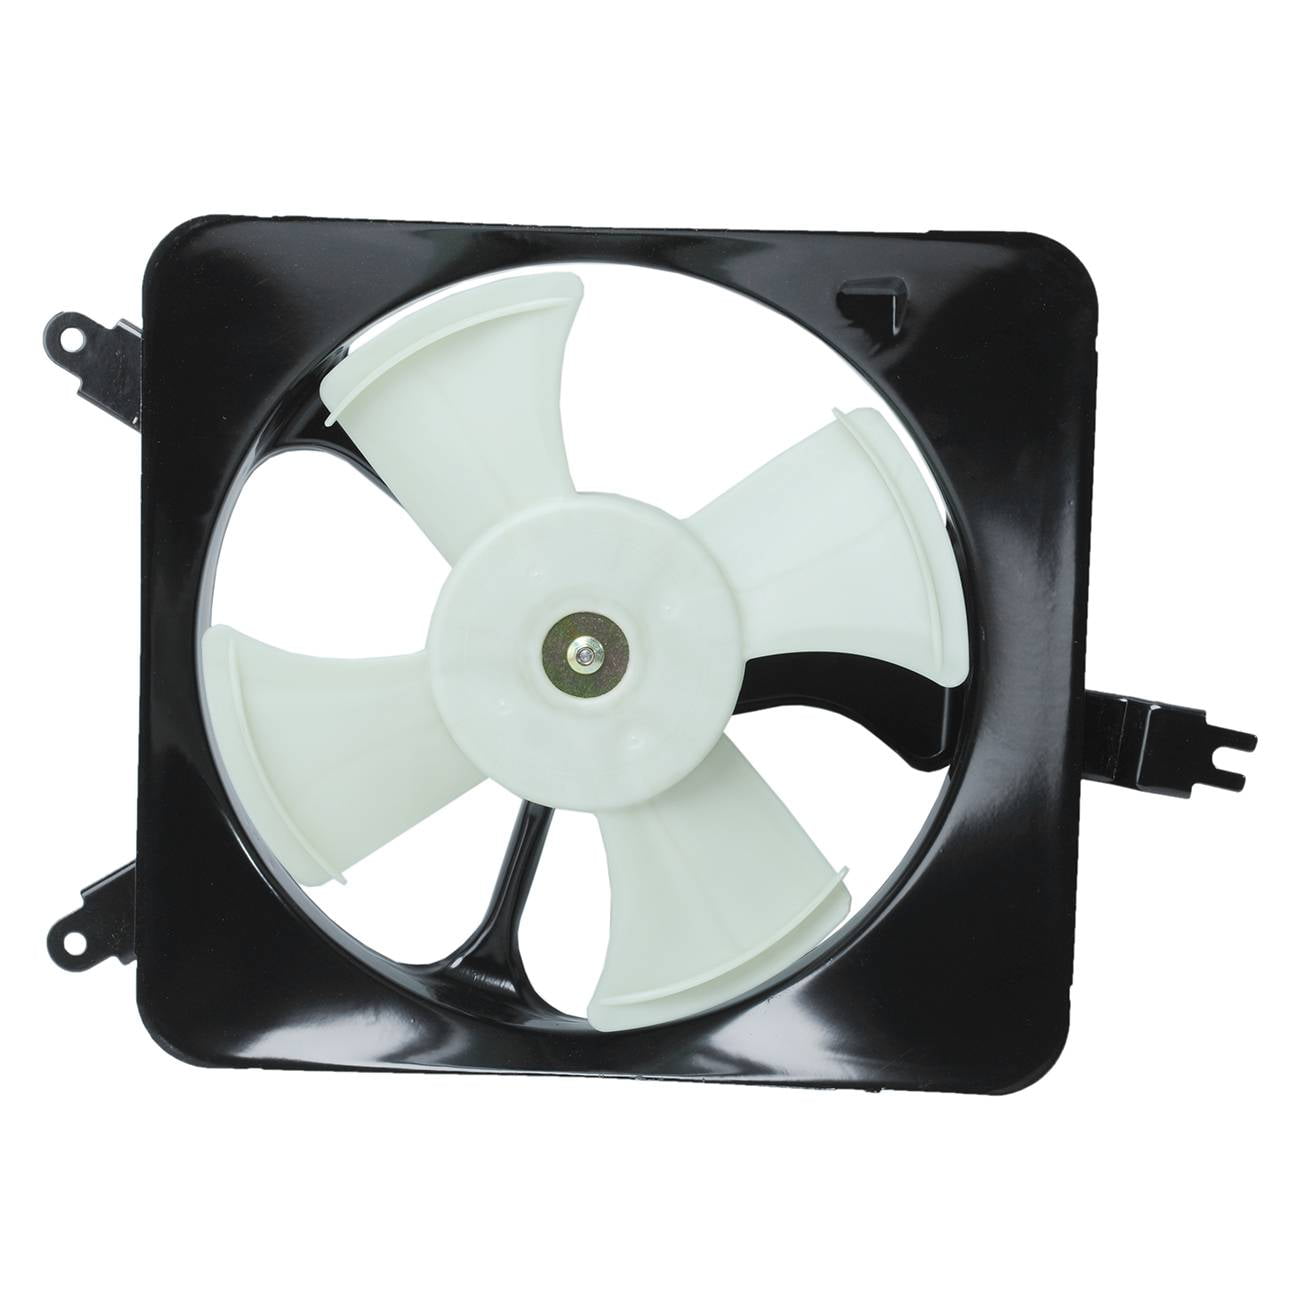 AC A/C Condenser Cooling Fan & Motor Assembly for Honda Accord Prelude